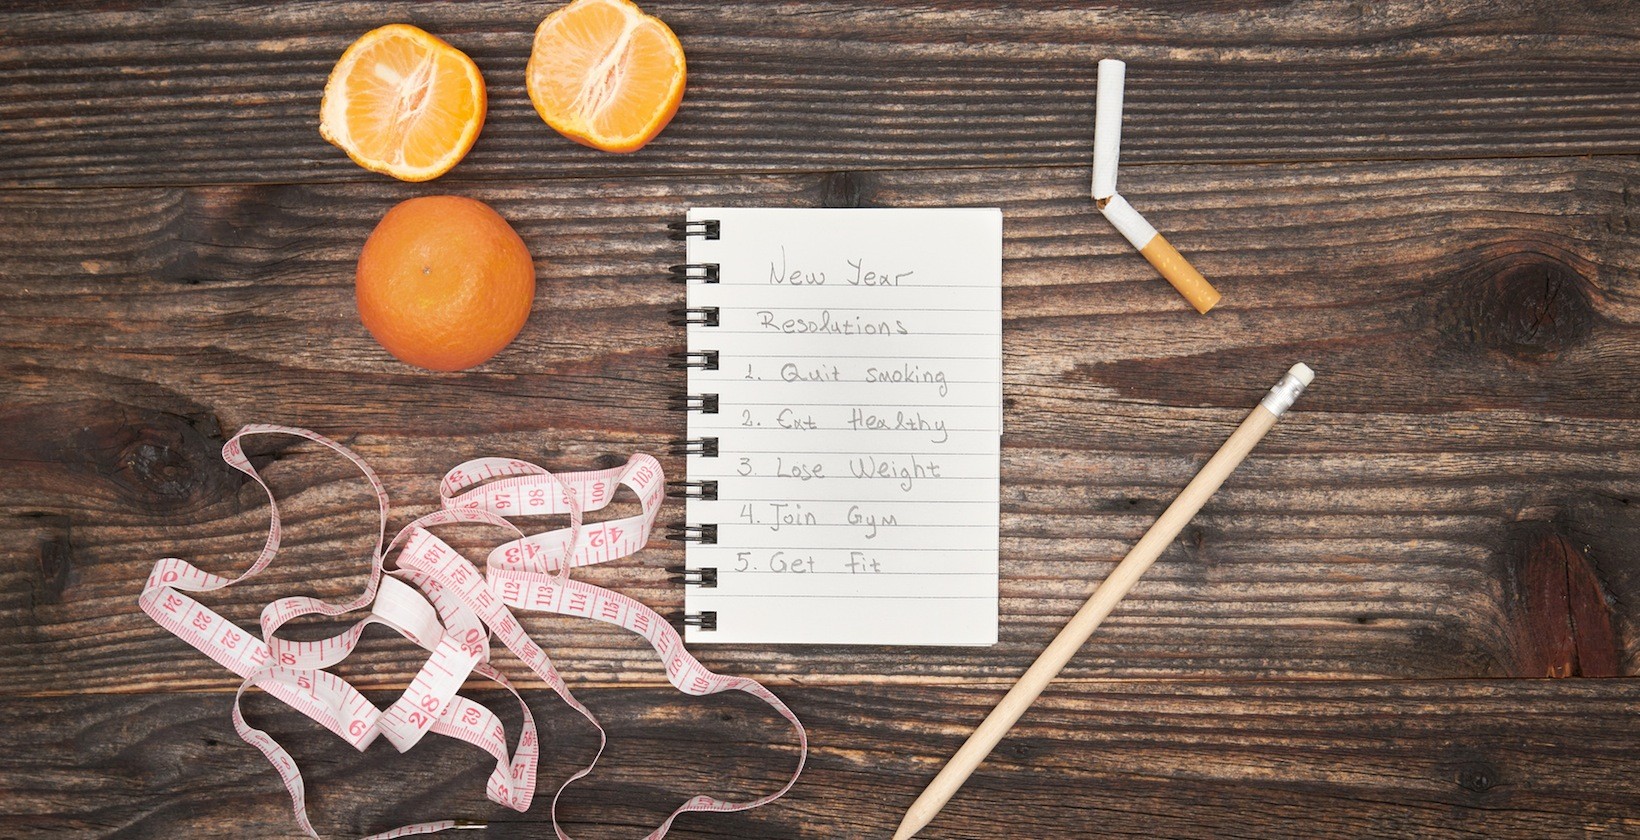 New year resolutions about to get healthy on the wooden background